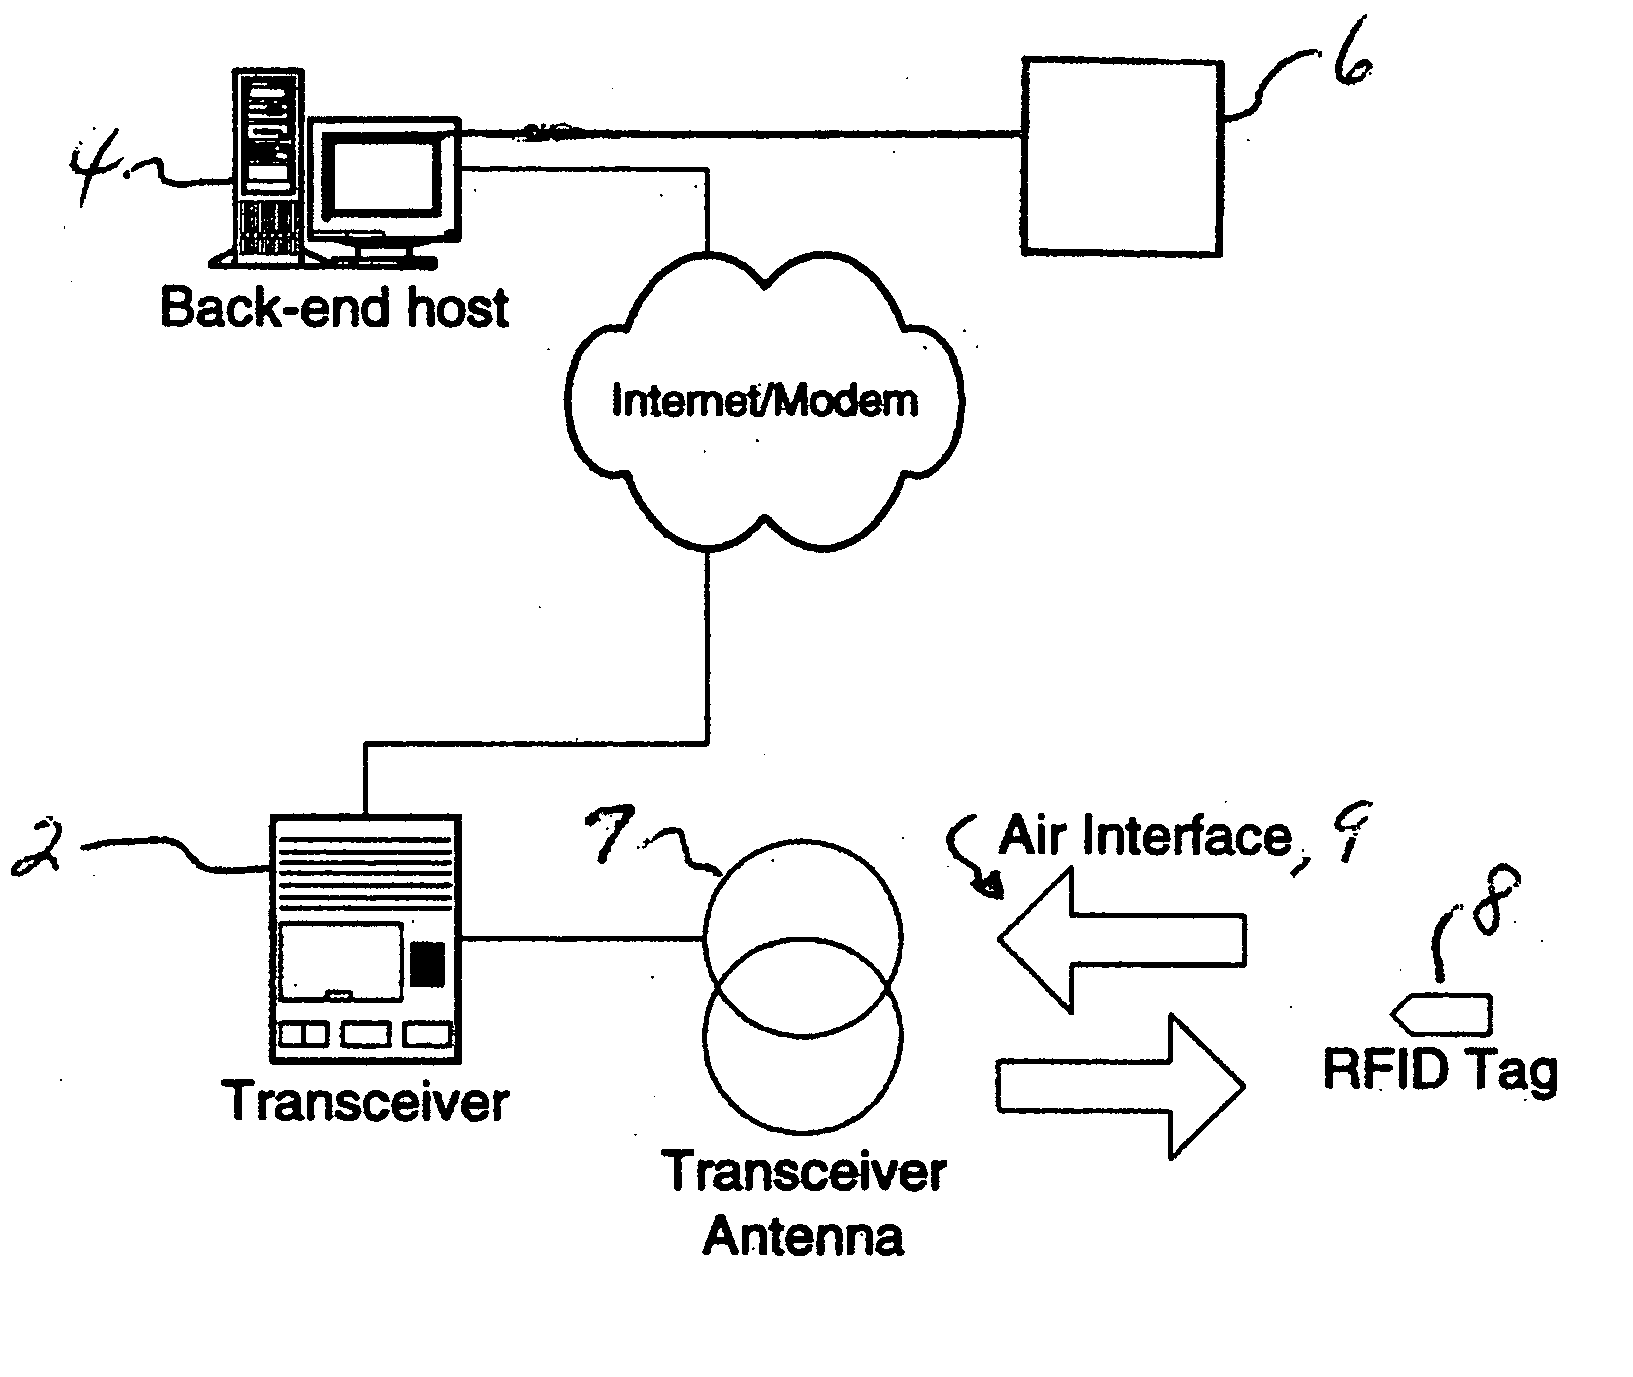 RFID device tracking and information gathering